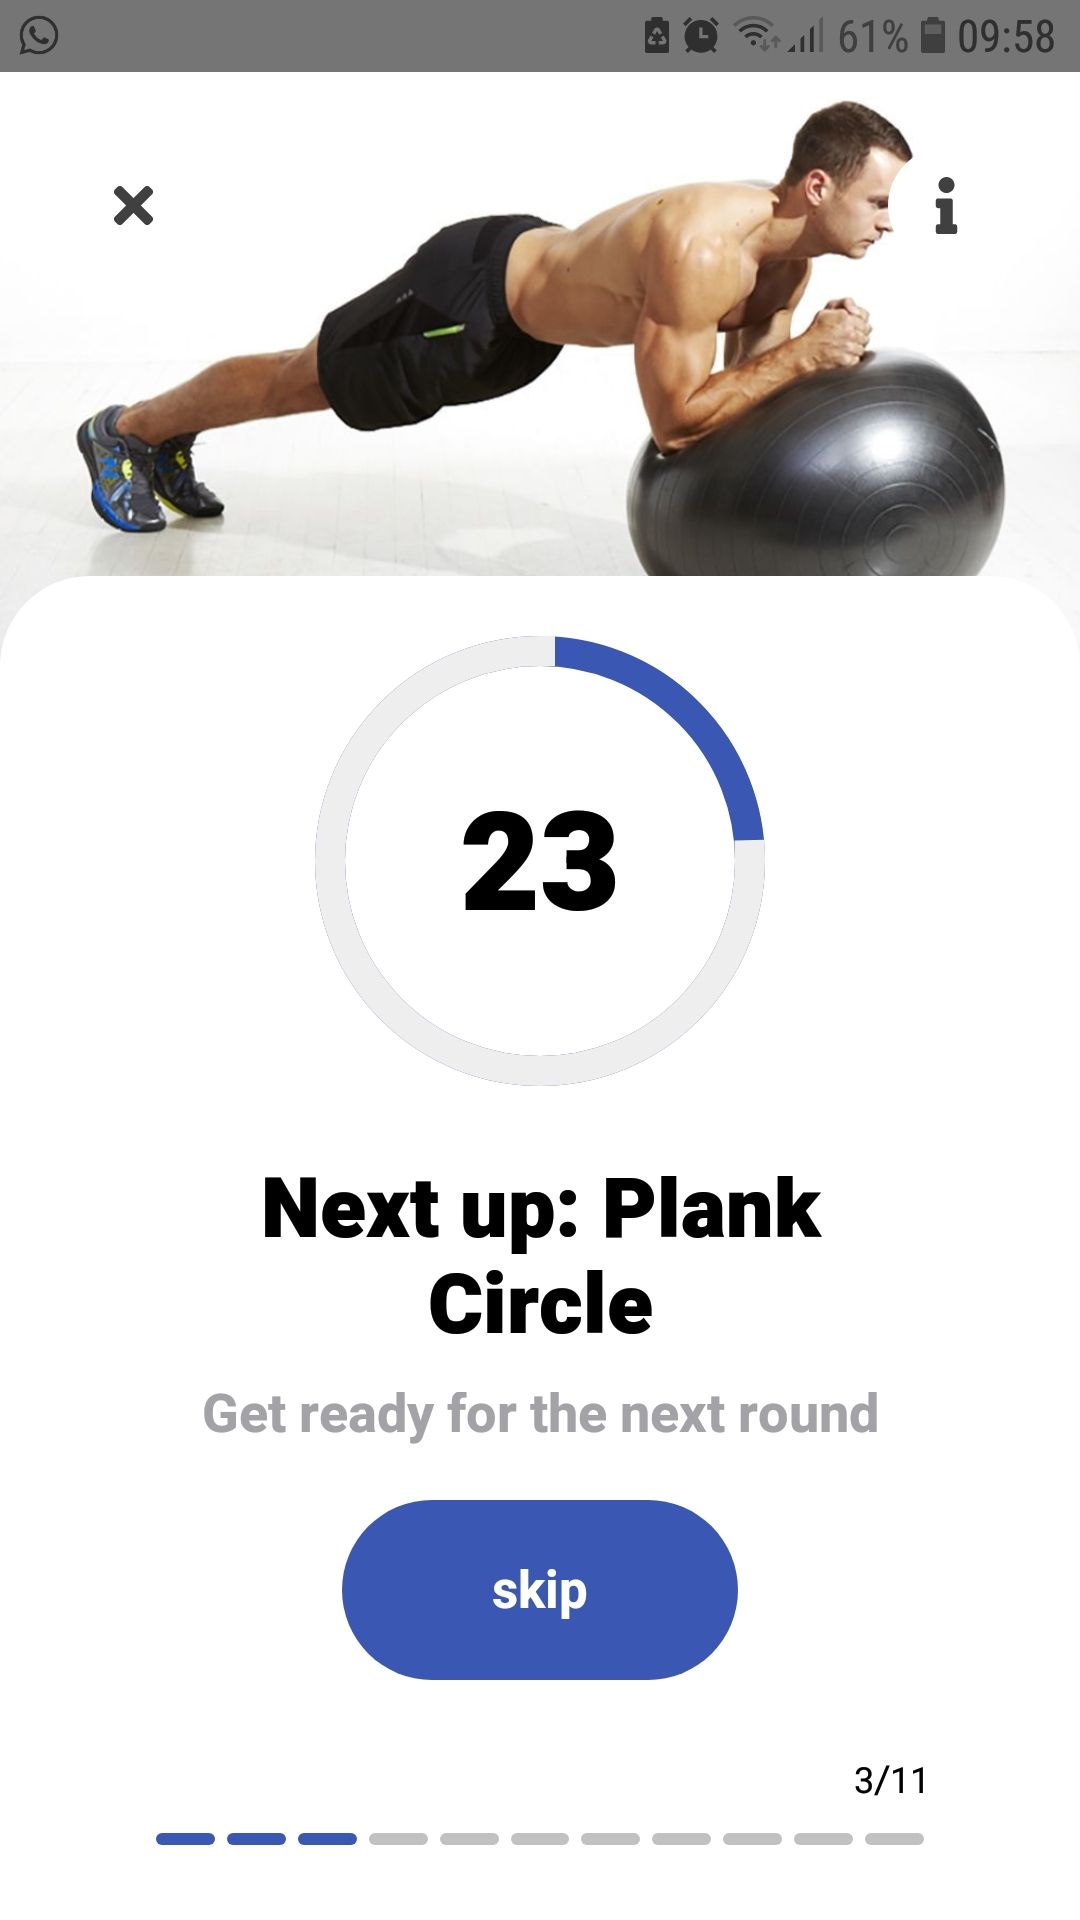 Stability Ball Workout Plan mobile fitness app plank